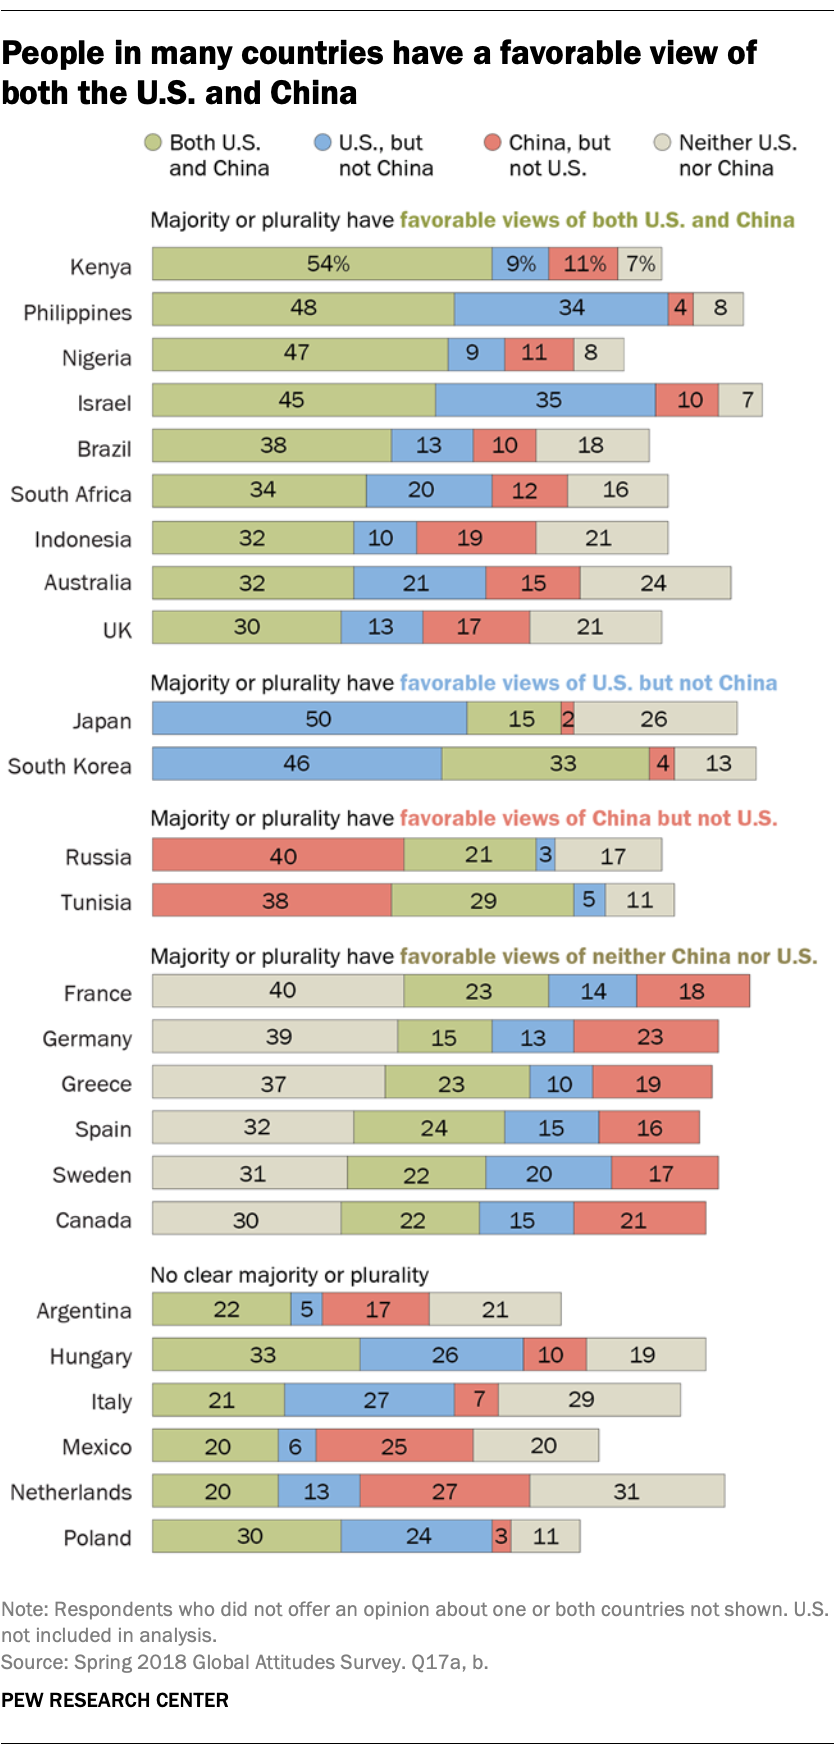 People in many countries have a favorable view of both the U.S. and China